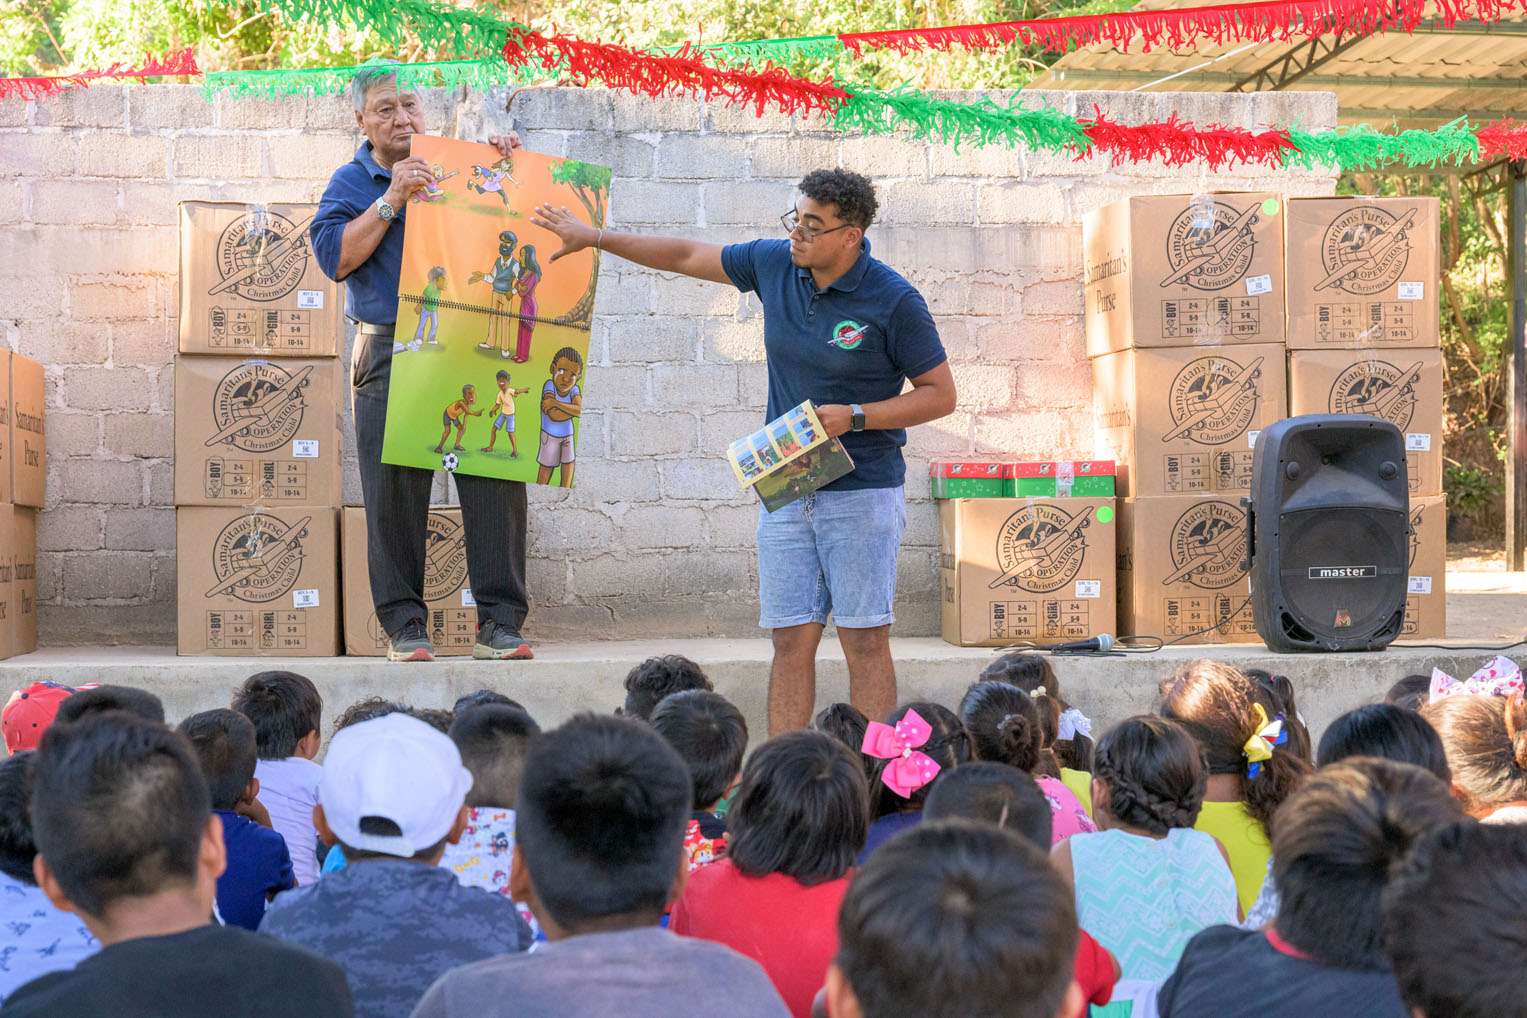 The Operation Christmas Child outreach event at Iglesia Cristiana Filadelfia blessed many children in Fernanda's neighborhood as they heard the Gospel of Jesus Christ.